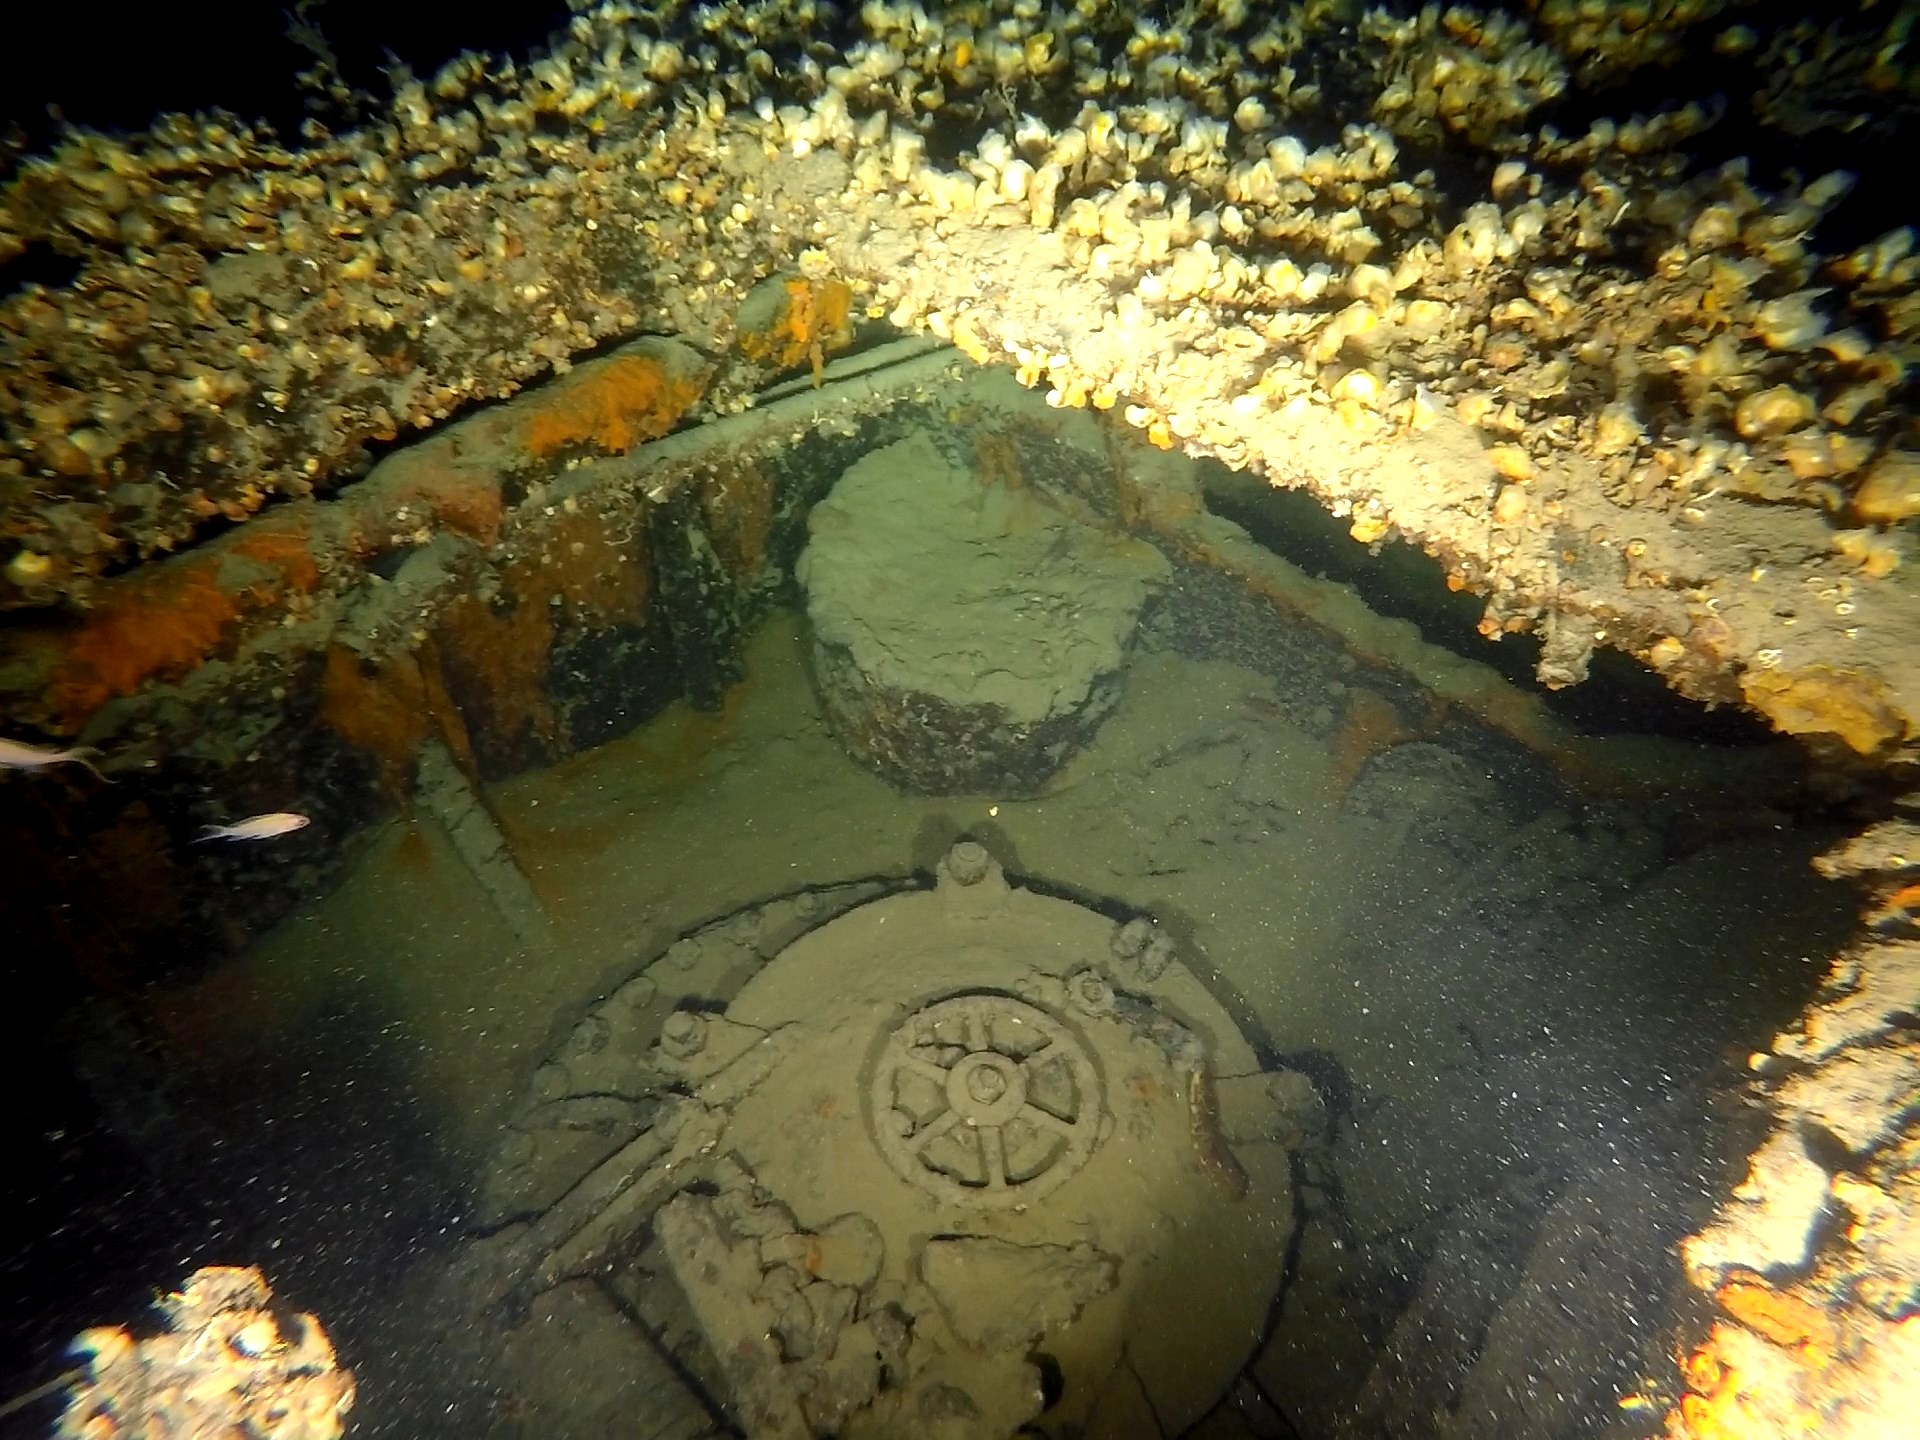 It was found on a submarine in the Aegean Sea that sank in 1942 (photos)